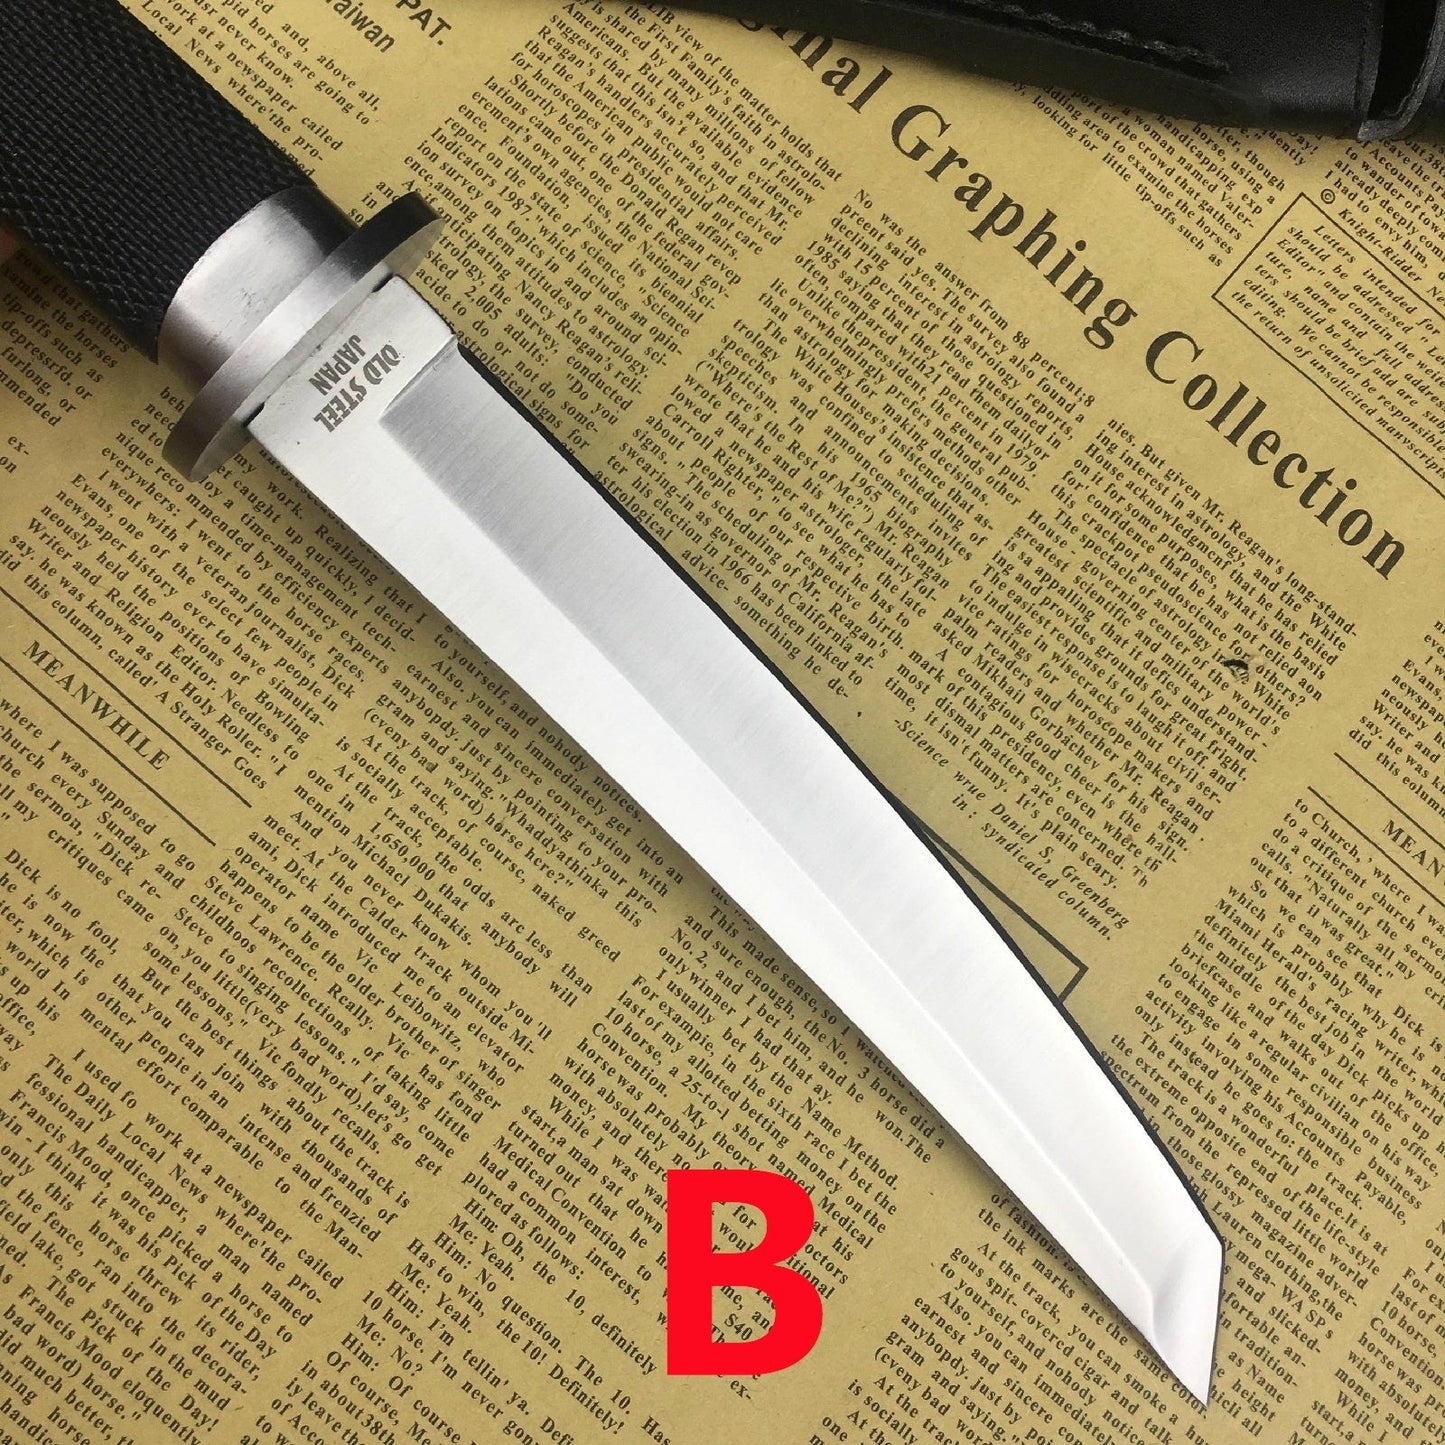 "13"" COLD STEEL Tanto Fixed Blade Knife ABS Handle with Sheath Hunting Army Tactical Dagger Self Defense Knives Survival Tools"